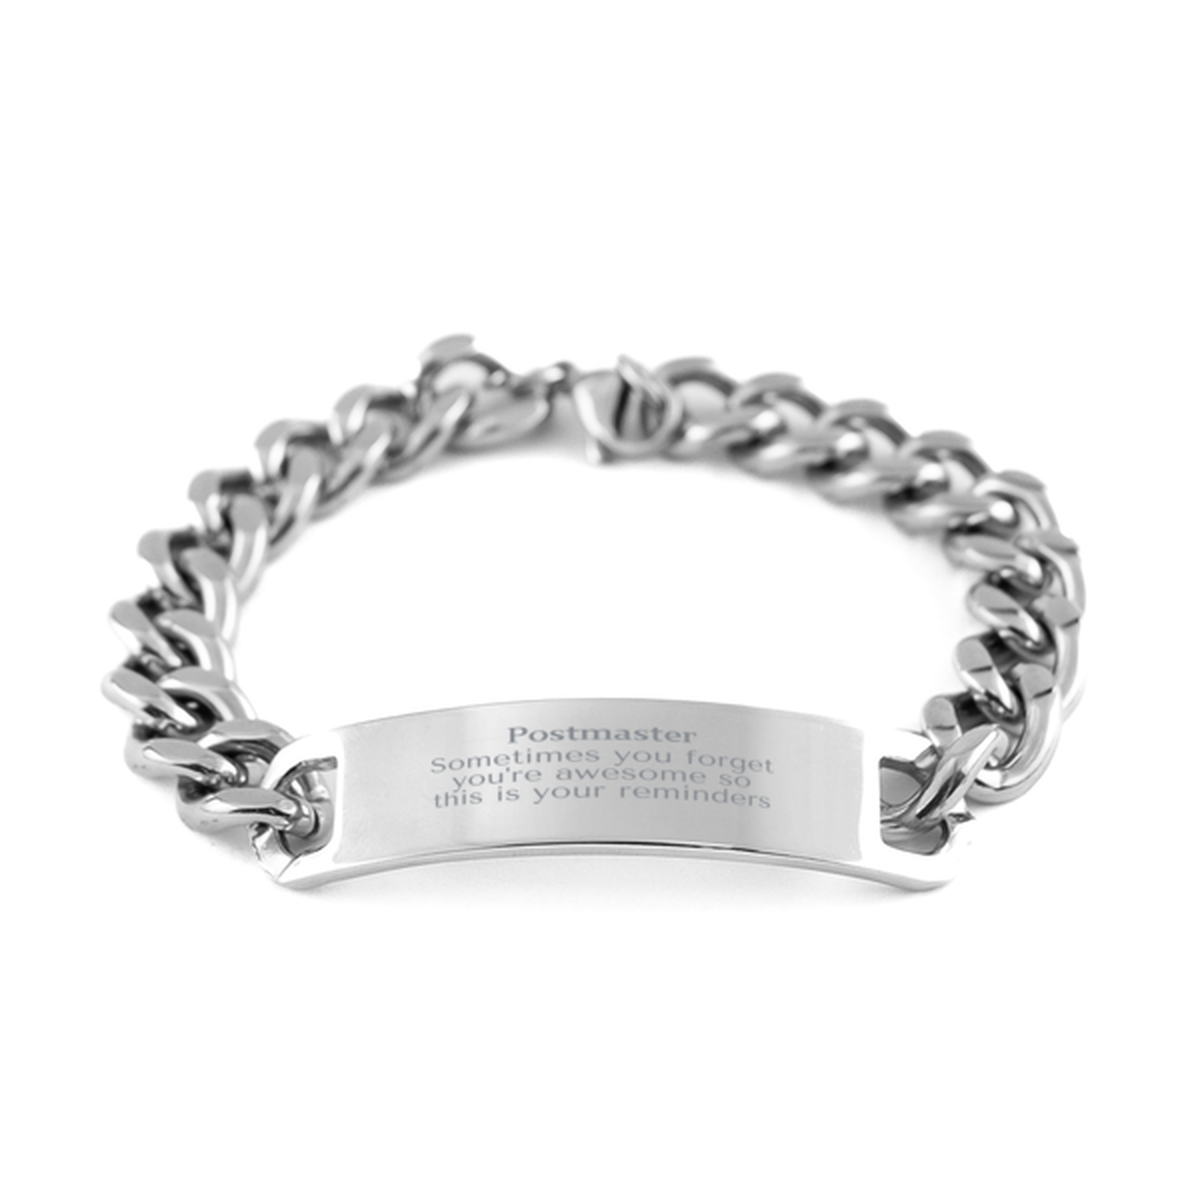 Sentimental Postmaster Cuban Chain Stainless Steel Bracelet, Postmaster Sometimes you forget you're awesome so this is your reminders, Graduation Christmas Birthday Gifts for Postmaster, Men, Women, Coworkers